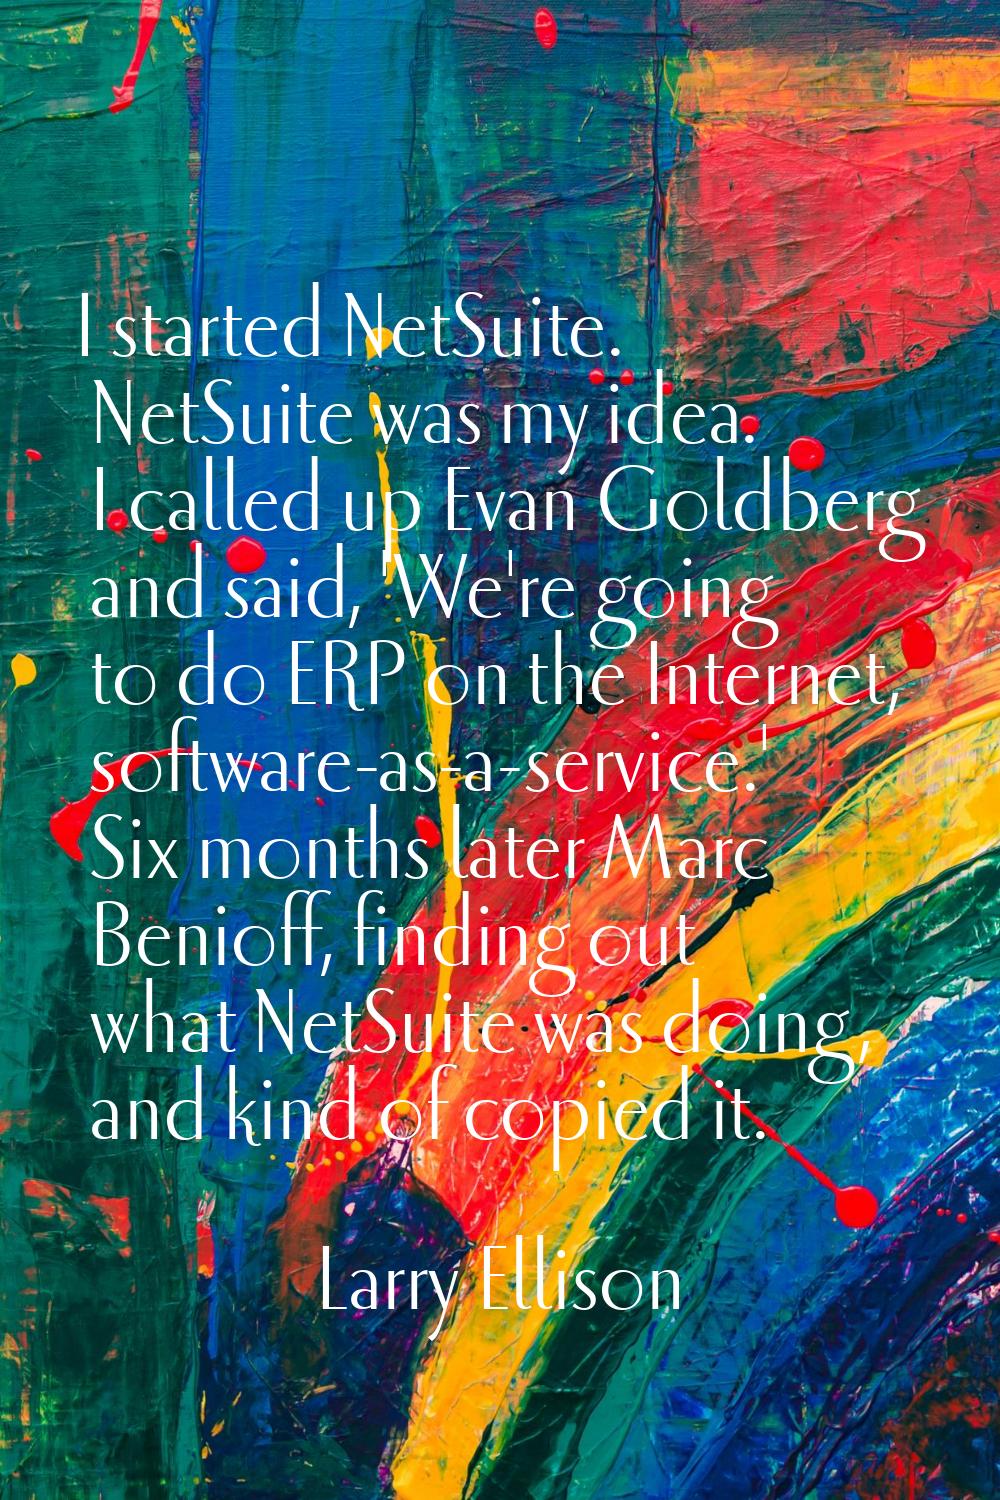 I started NetSuite. NetSuite was my idea. I called up Evan Goldberg and said, 'We're going to do ER